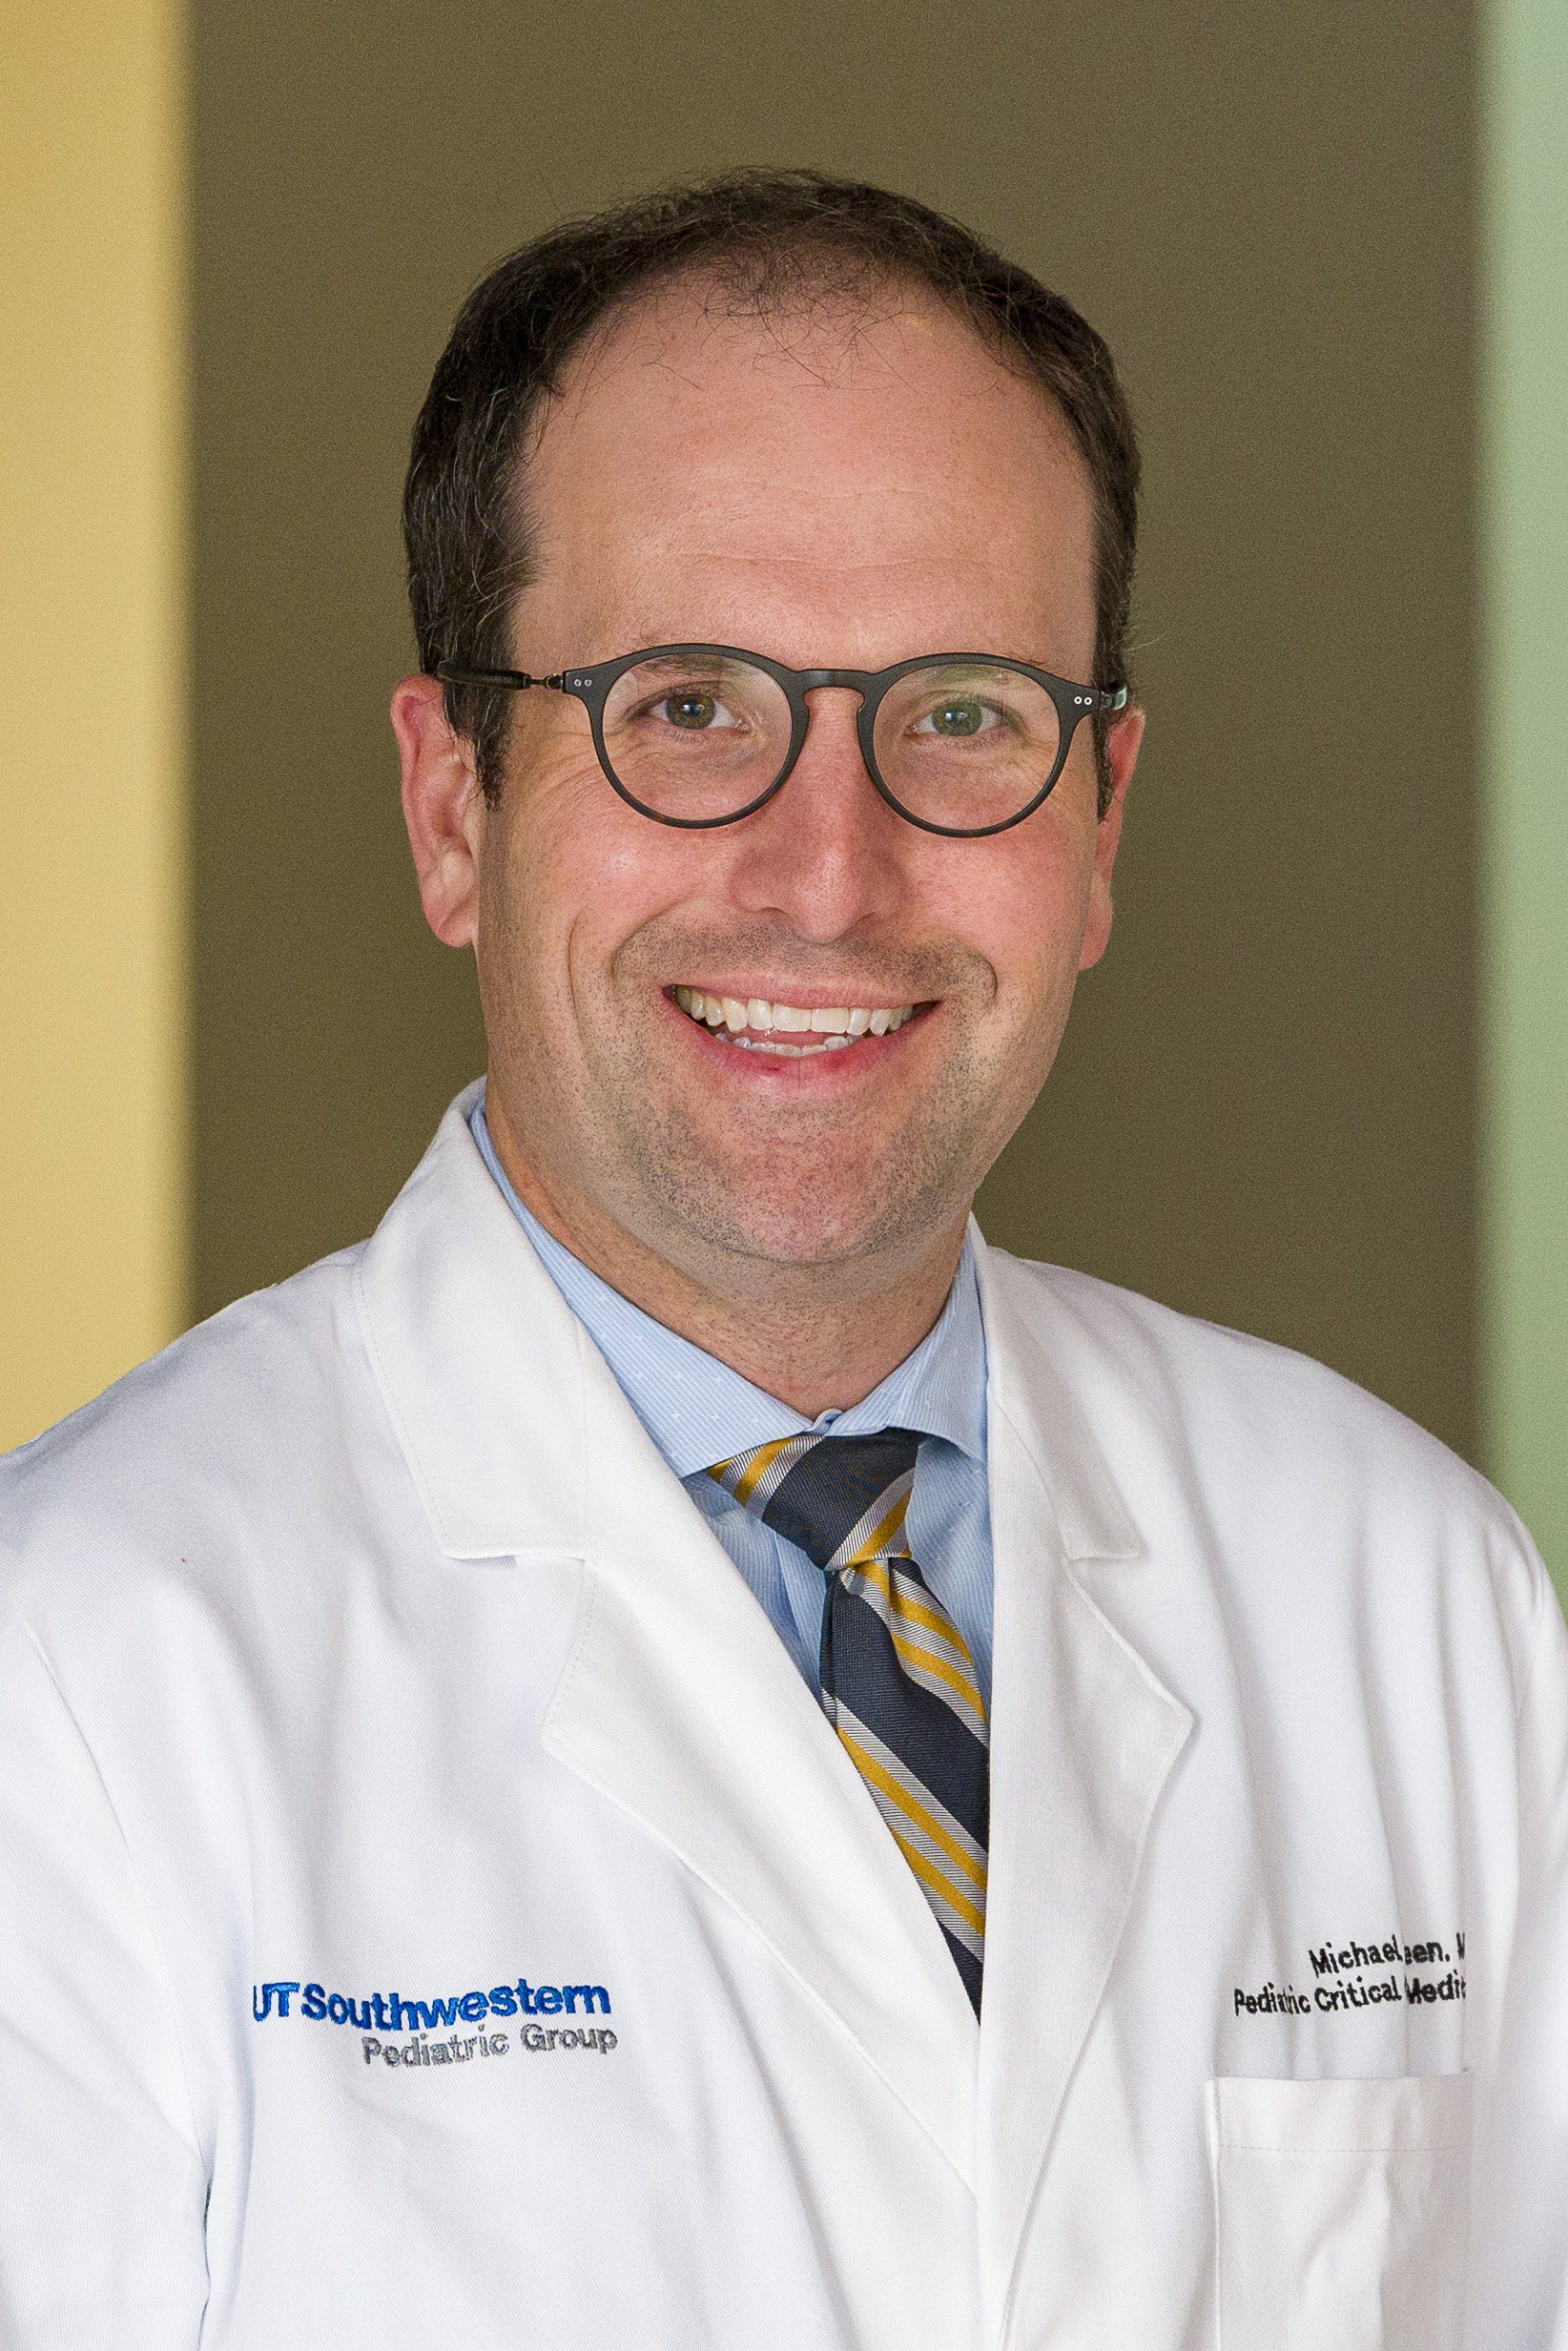 Dr. Green, a smiling man with thinning hair wearing glasses and a white lab coat.